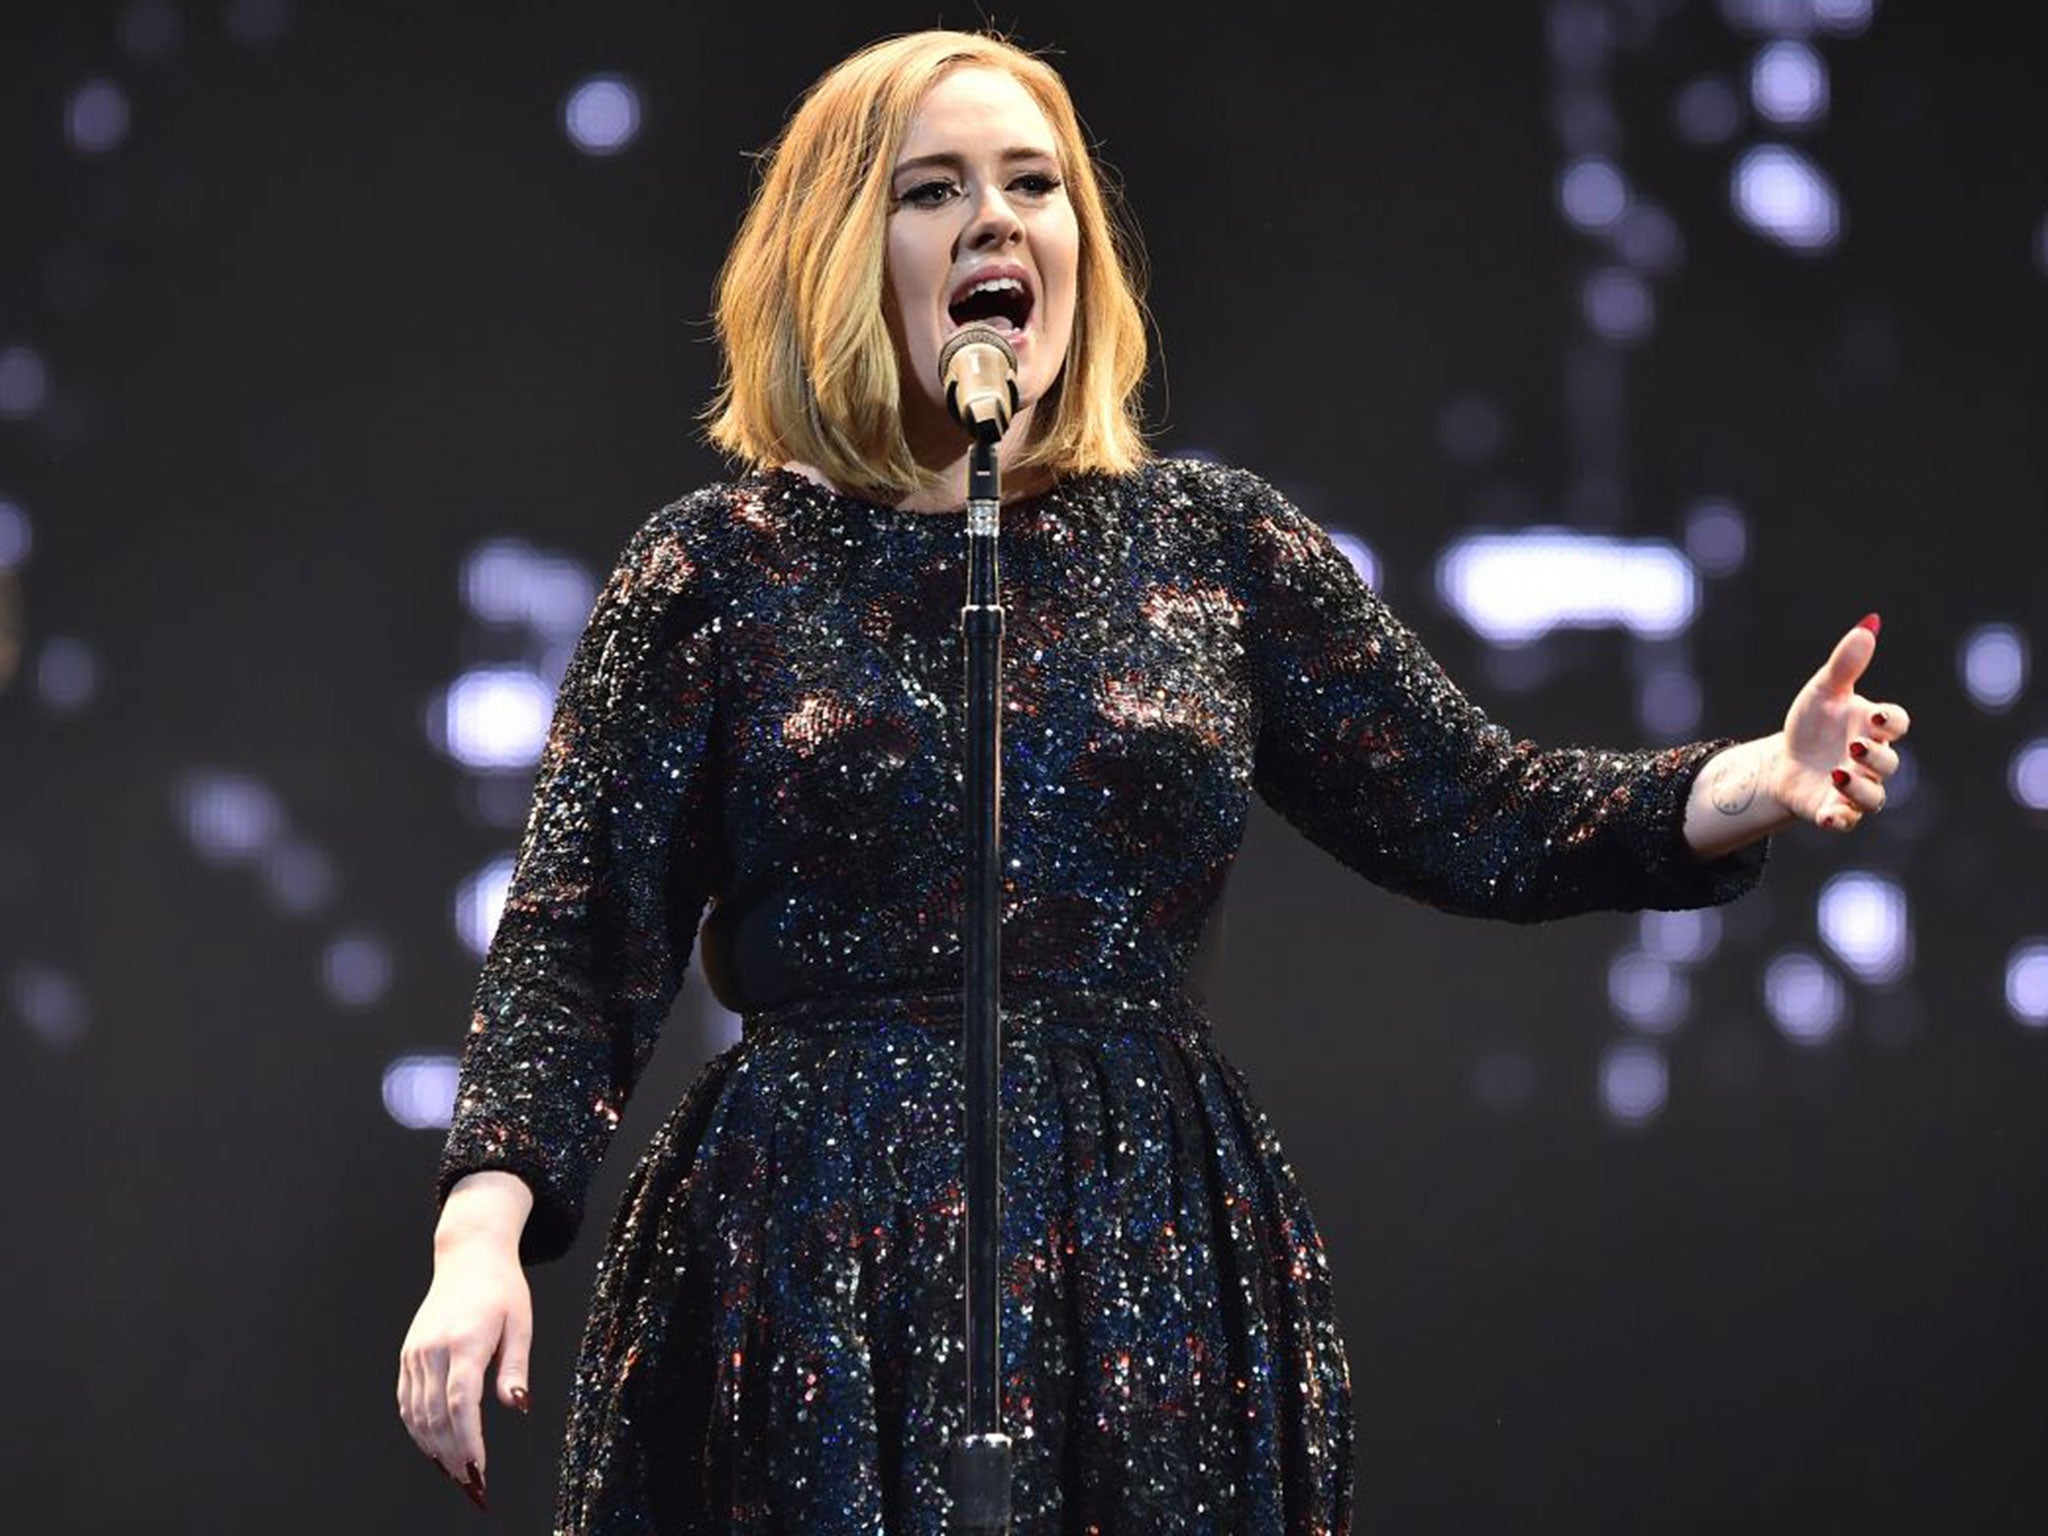 Adele is now listed above Cliff Richard Ronnie Wood Gary Barlow and Kylie Minogue in the annual list